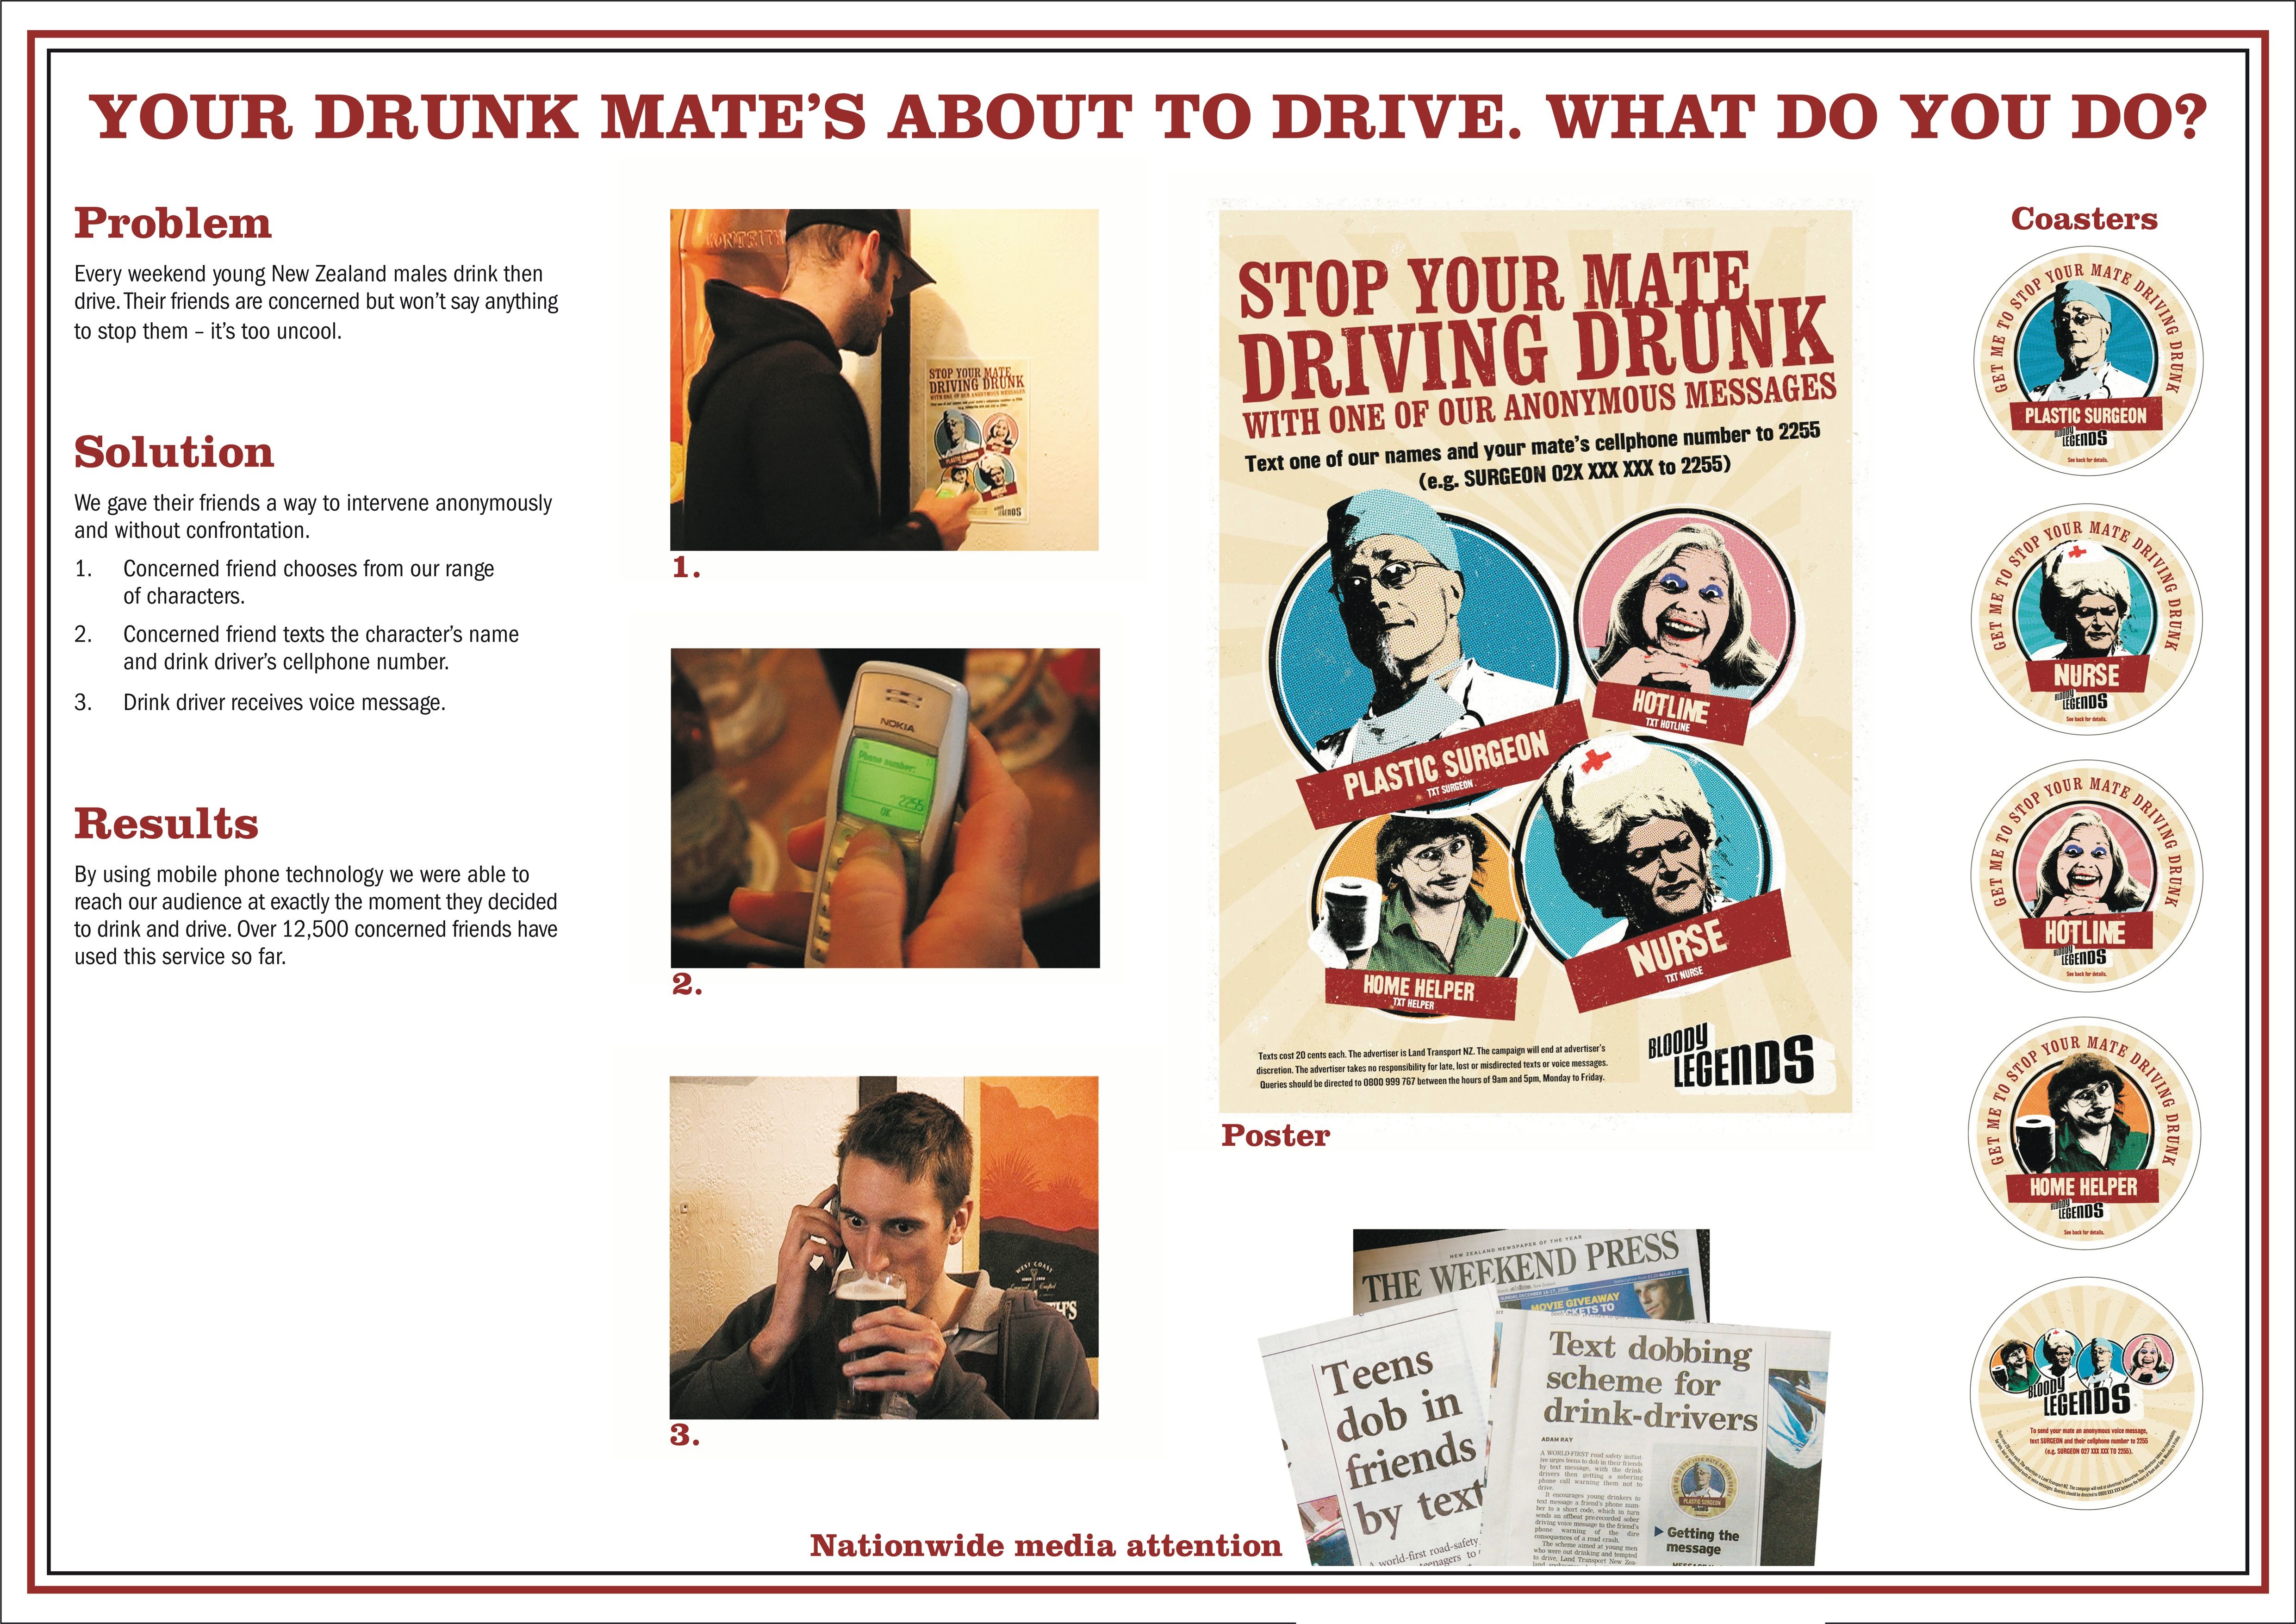 ANTI-DRINK DRIVING MESSAGE